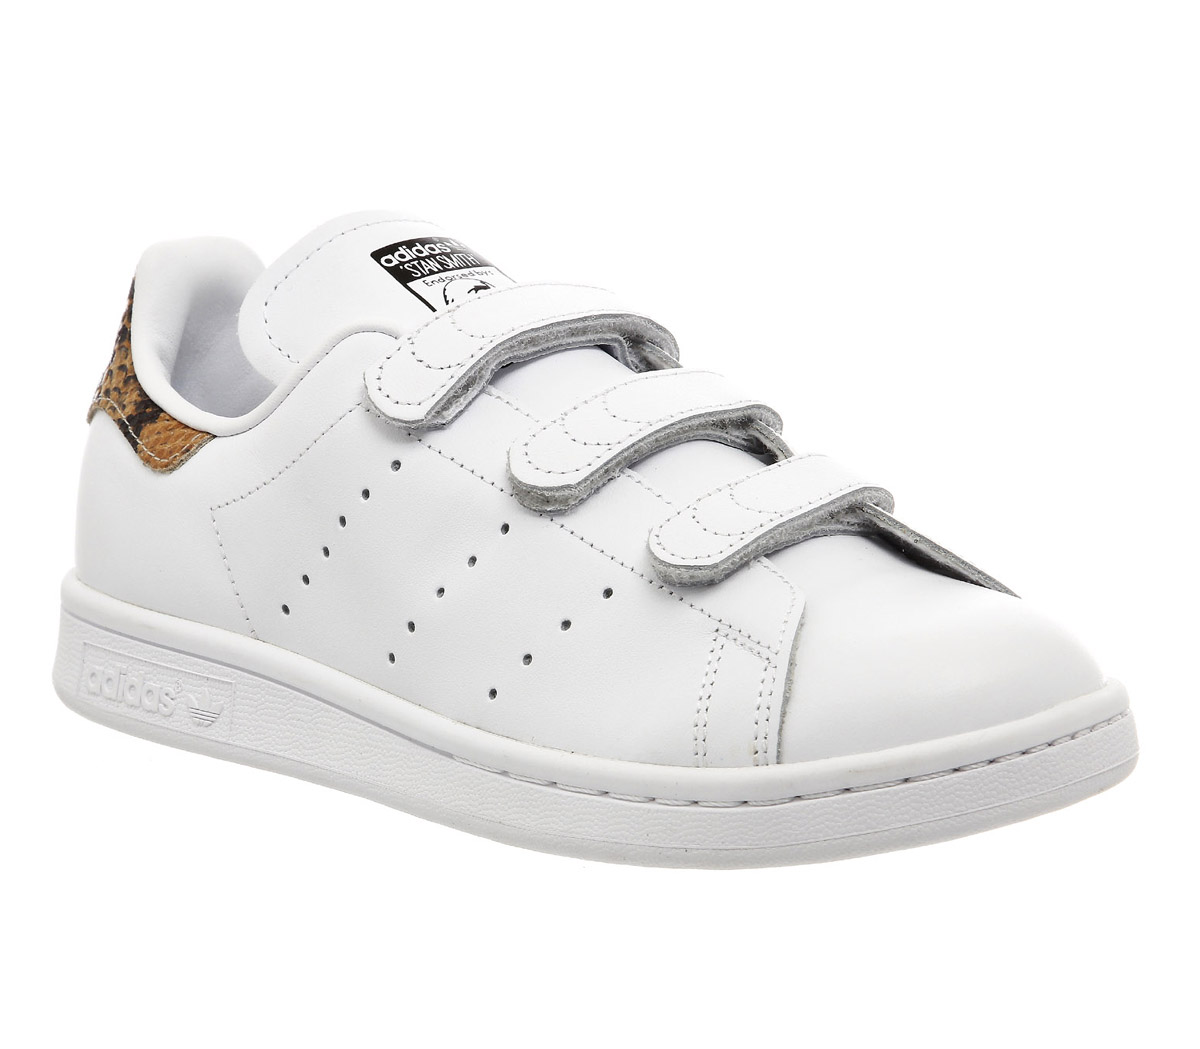 adidas 3 strap shoes